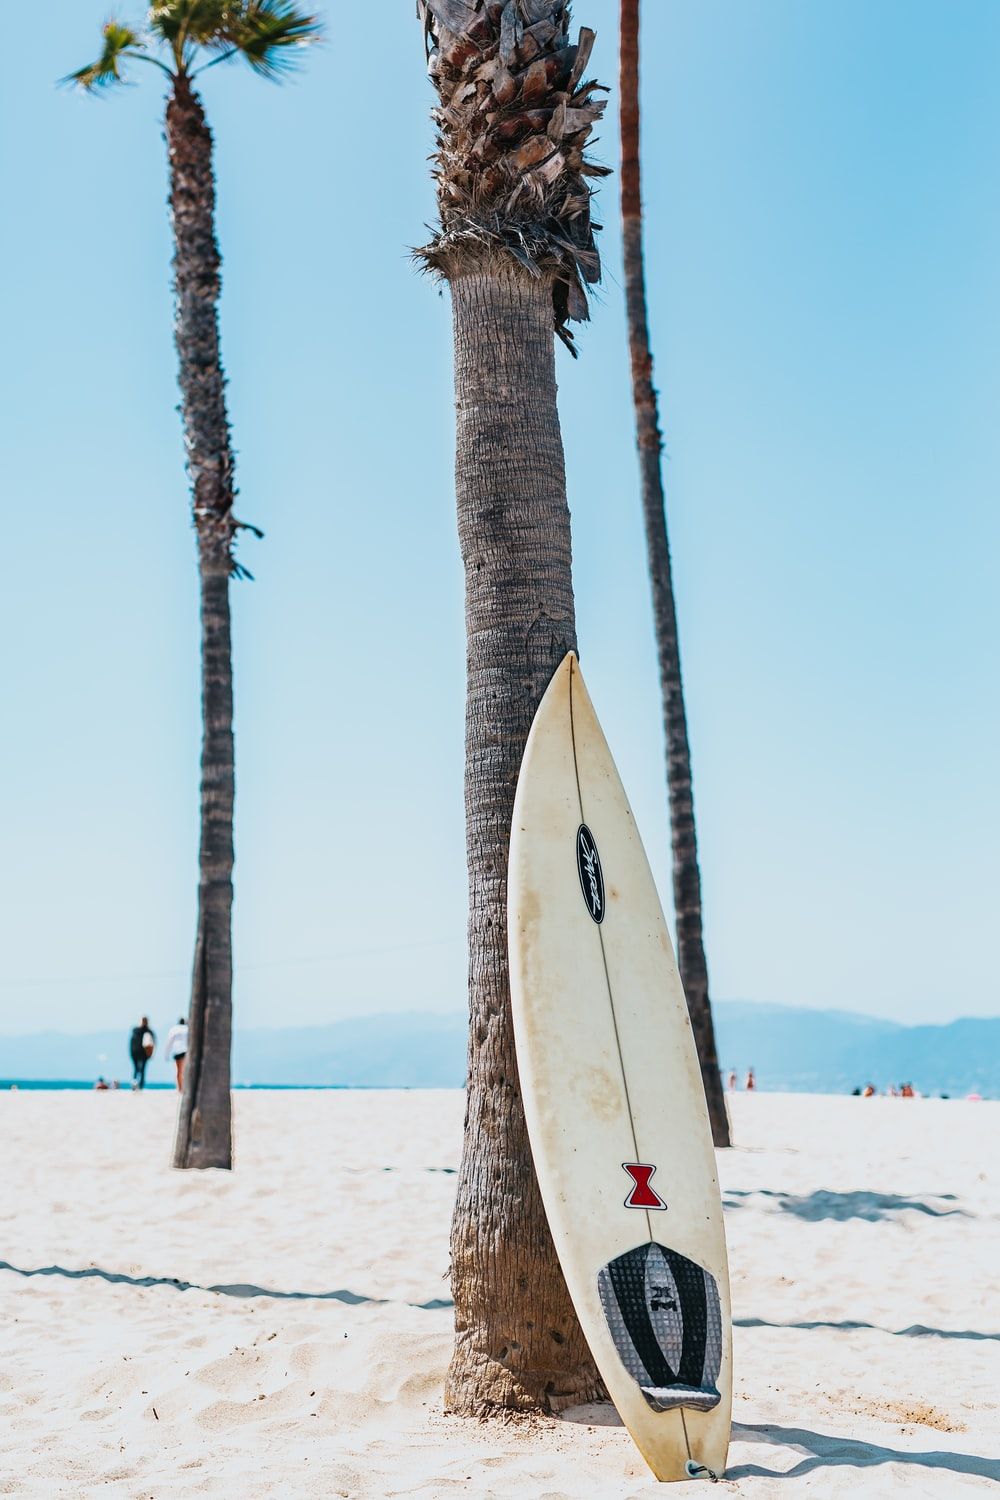 Surf Picture. Download Free Image